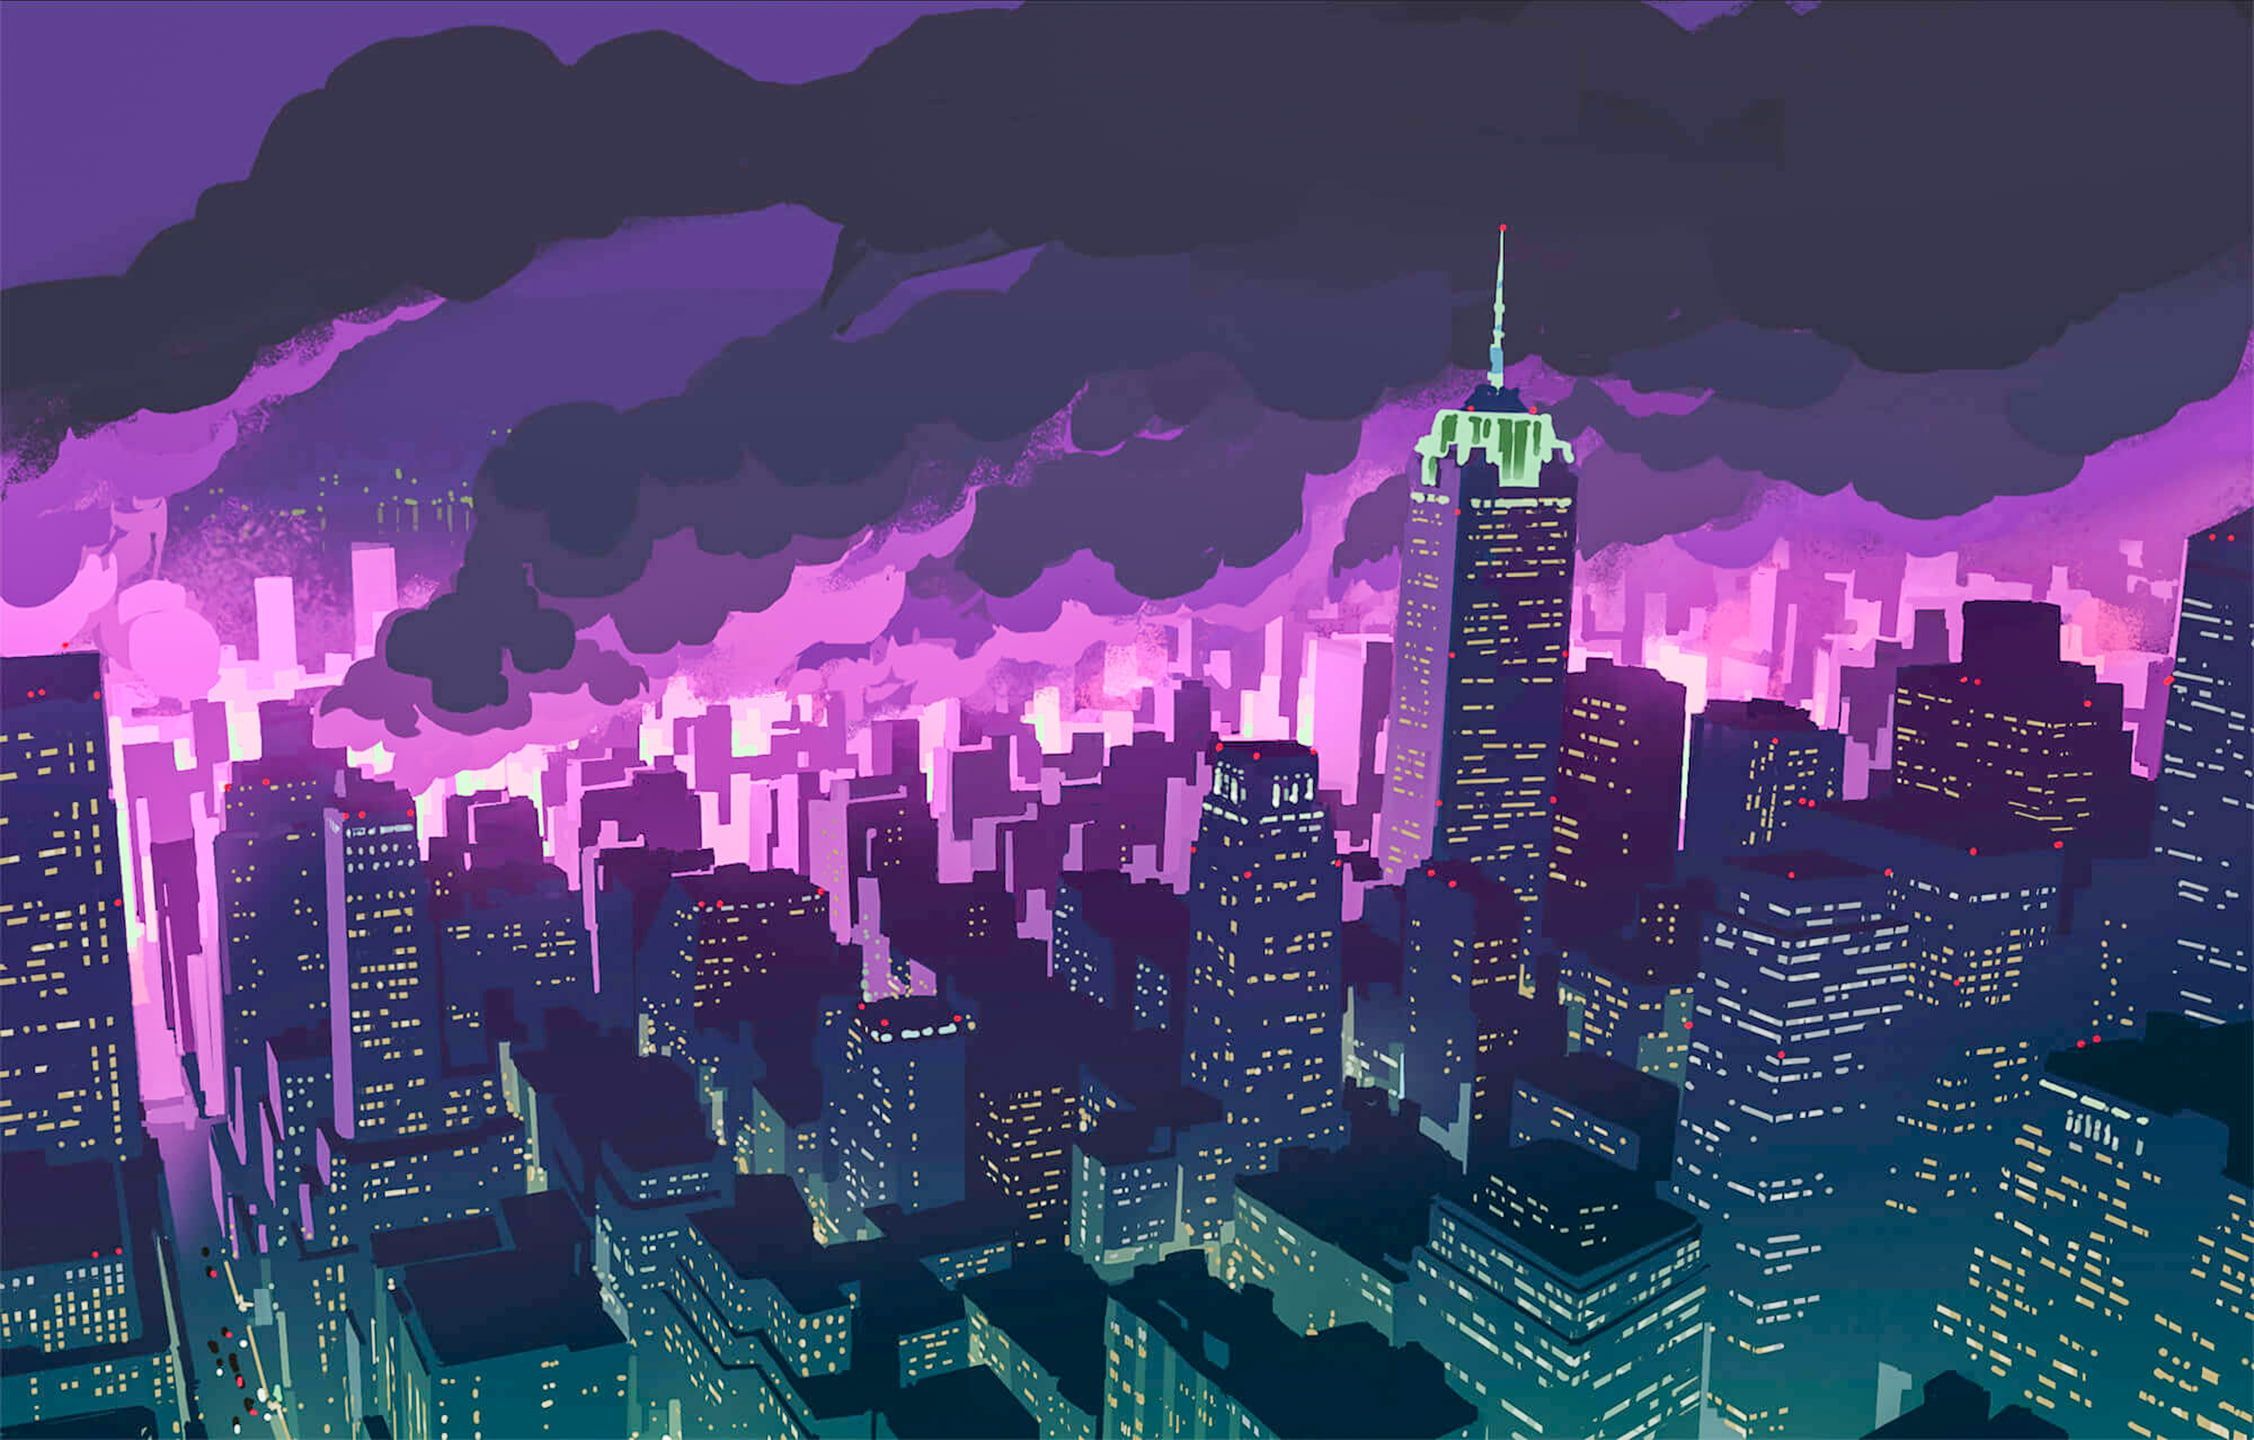 Anime City Purple Wallpapers - Wallpaper Cave